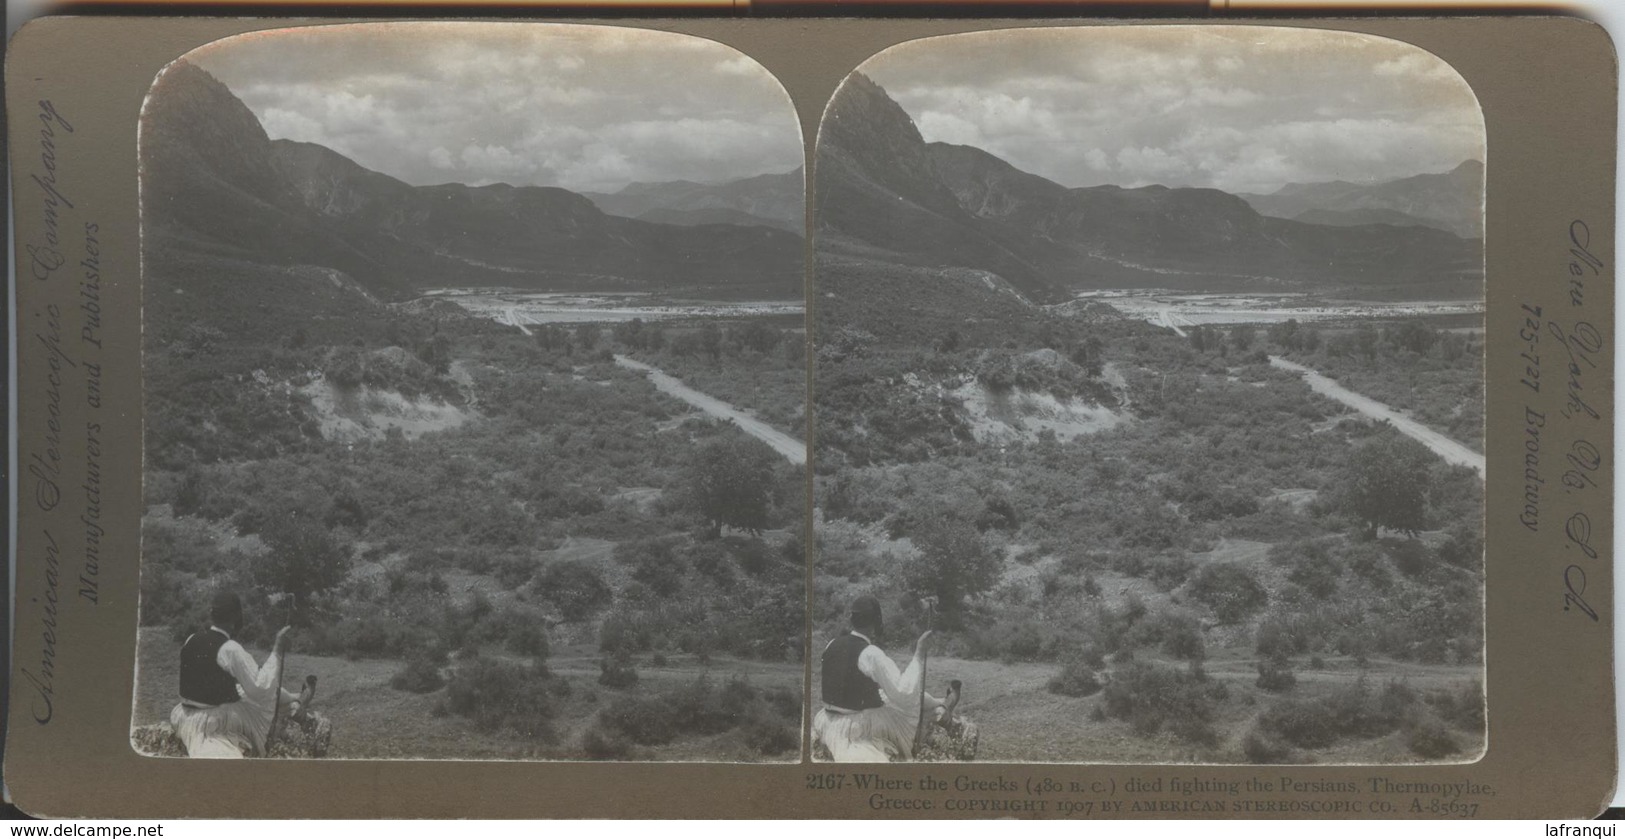 Ref A292 -photo Stereoscopique -vue Stereo - Grece - Greece -thermopylae Where The Greeks Figth Persians -perse - - Photos Stéréoscopiques